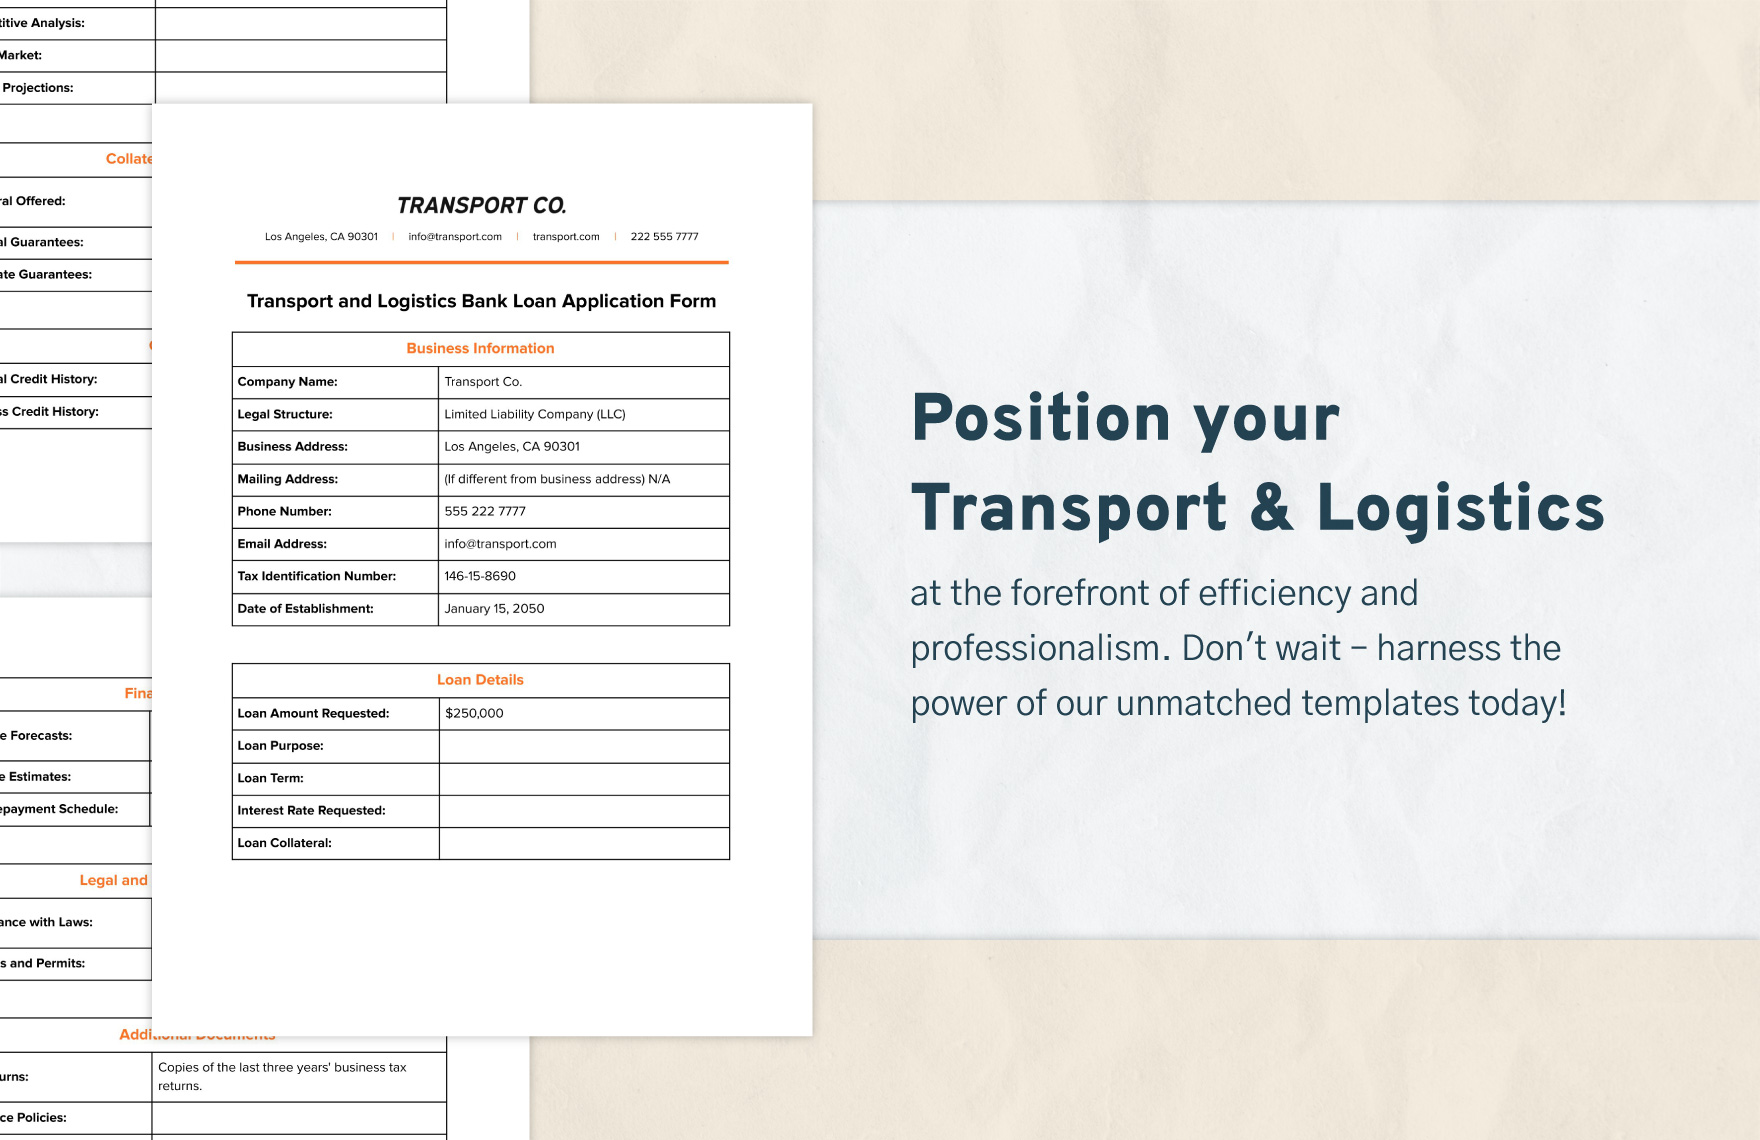 Transport and Logistics Bank Loan Application Form Template